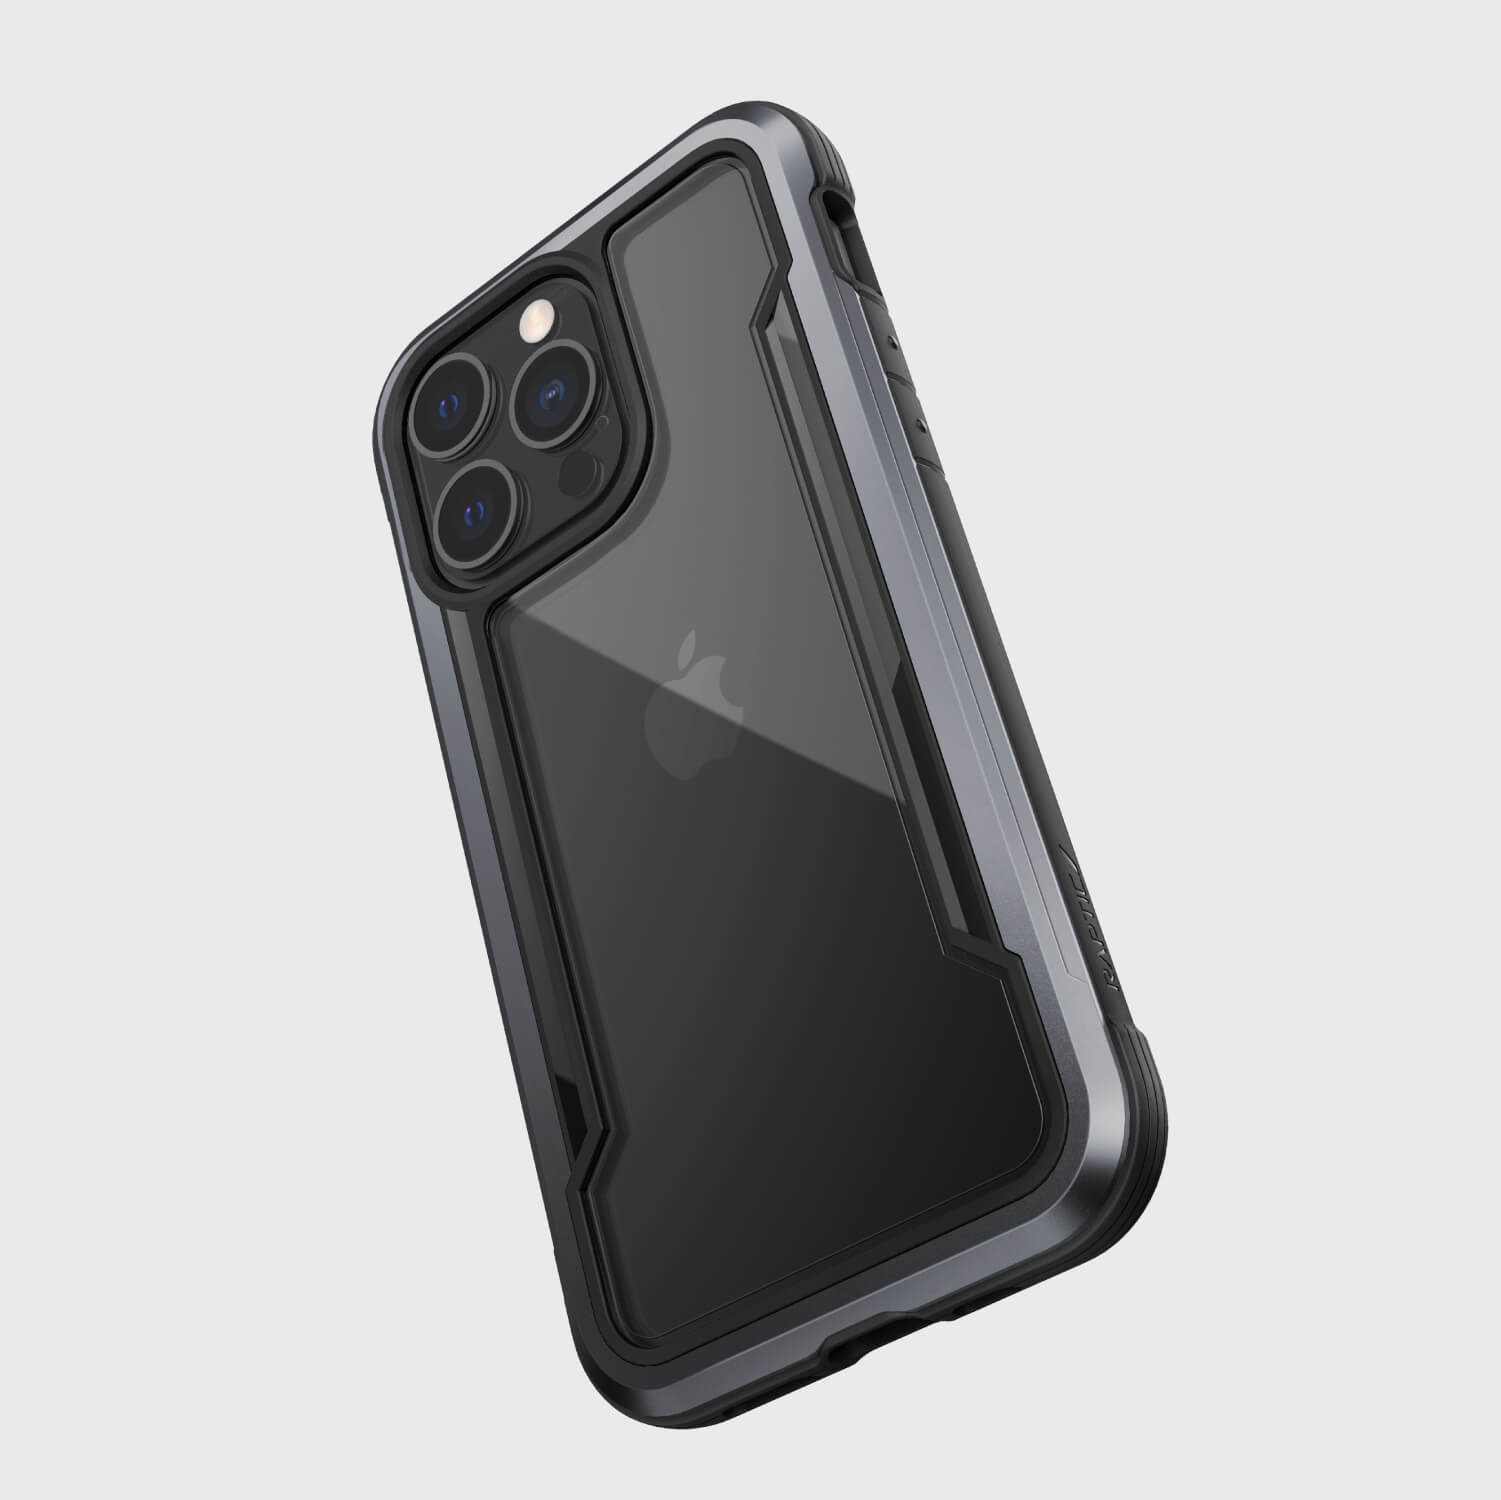 The Raptic Shield Pro is a durable iPhone 13 Pro Max Case - SHIELD PRO designed specifically for drop protection.